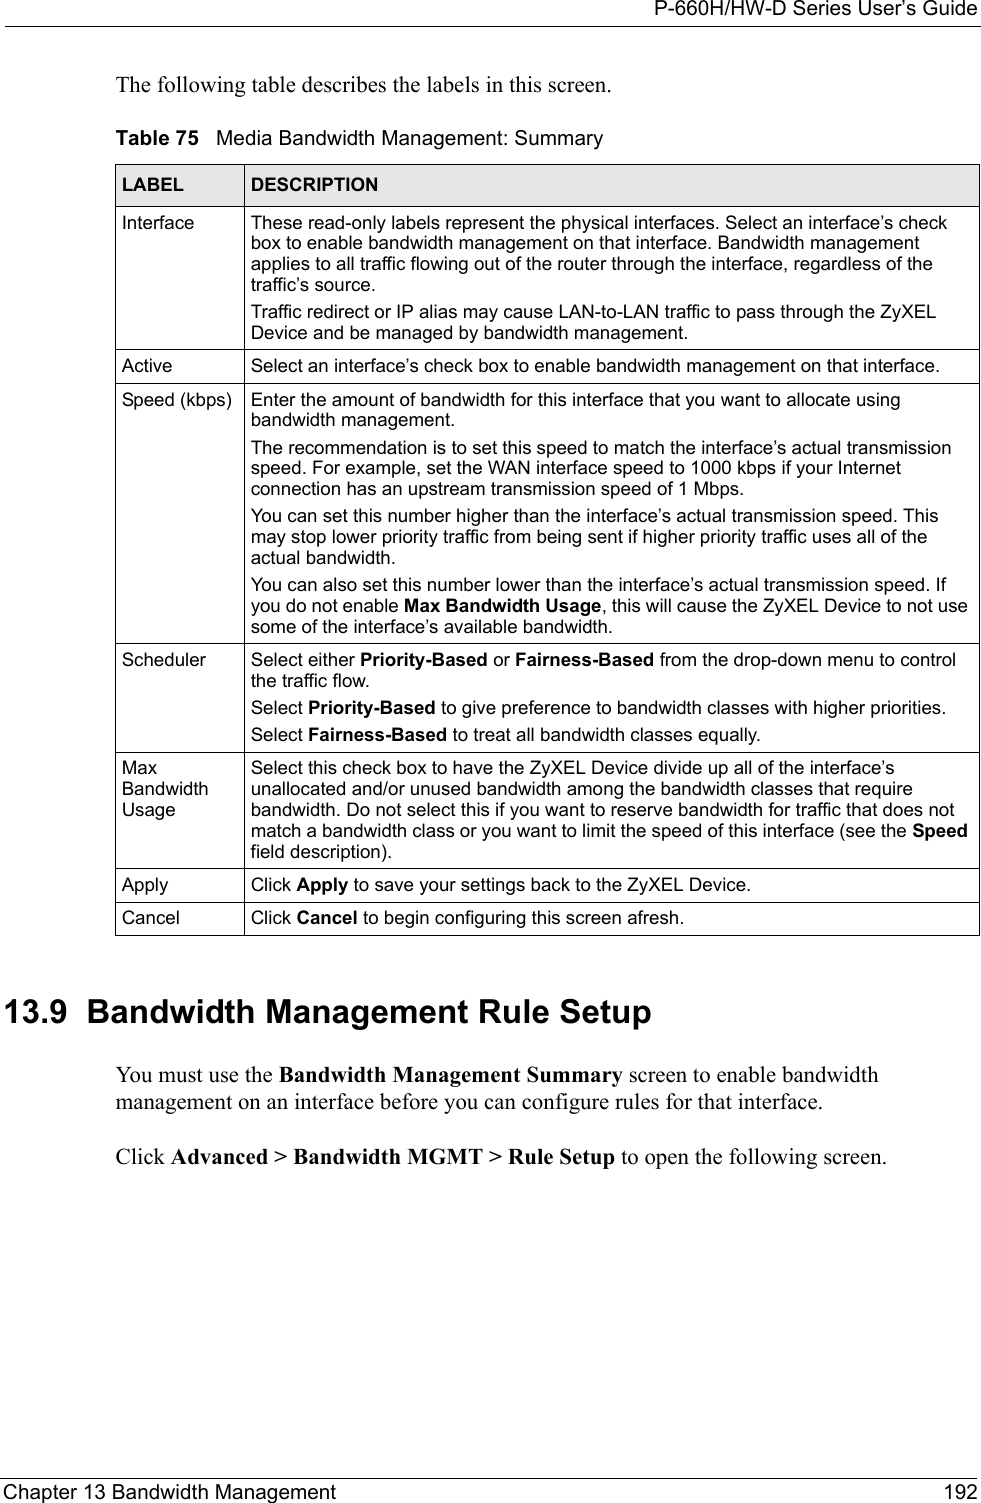 P-660H/HW-D Series User’s GuideChapter 13 Bandwidth Management 192The following table describes the labels in this screen. 13.9  Bandwidth Management Rule Setup   You must use the Bandwidth Management Summary screen to enable bandwidth management on an interface before you can configure rules for that interface.Click Advanced &gt; Bandwidth MGMT &gt; Rule Setup to open the following screen.Table 75   Media Bandwidth Management: SummaryLABEL DESCRIPTIONInterface These read-only labels represent the physical interfaces. Select an interface’s check box to enable bandwidth management on that interface. Bandwidth management applies to all traffic flowing out of the router through the interface, regardless of the traffic’s source.Traffic redirect or IP alias may cause LAN-to-LAN traffic to pass through the ZyXEL Device and be managed by bandwidth management.Active Select an interface’s check box to enable bandwidth management on that interface. Speed (kbps) Enter the amount of bandwidth for this interface that you want to allocate using bandwidth management. The recommendation is to set this speed to match the interface’s actual transmission speed. For example, set the WAN interface speed to 1000 kbps if your Internet connection has an upstream transmission speed of 1 Mbps.        You can set this number higher than the interface’s actual transmission speed. This may stop lower priority traffic from being sent if higher priority traffic uses all of the actual bandwidth. You can also set this number lower than the interface’s actual transmission speed. If you do not enable Max Bandwidth Usage, this will cause the ZyXEL Device to not use some of the interface’s available bandwidth.Scheduler Select either Priority-Based or Fairness-Based from the drop-down menu to control the traffic flow. Select Priority-Based to give preference to bandwidth classes with higher priorities. Select Fairness-Based to treat all bandwidth classes equally.Max Bandwidth UsageSelect this check box to have the ZyXEL Device divide up all of the interface’s unallocated and/or unused bandwidth among the bandwidth classes that require bandwidth. Do not select this if you want to reserve bandwidth for traffic that does not match a bandwidth class or you want to limit the speed of this interface (see the Speed field description).Apply Click Apply to save your settings back to the ZyXEL Device.Cancel Click Cancel to begin configuring this screen afresh.